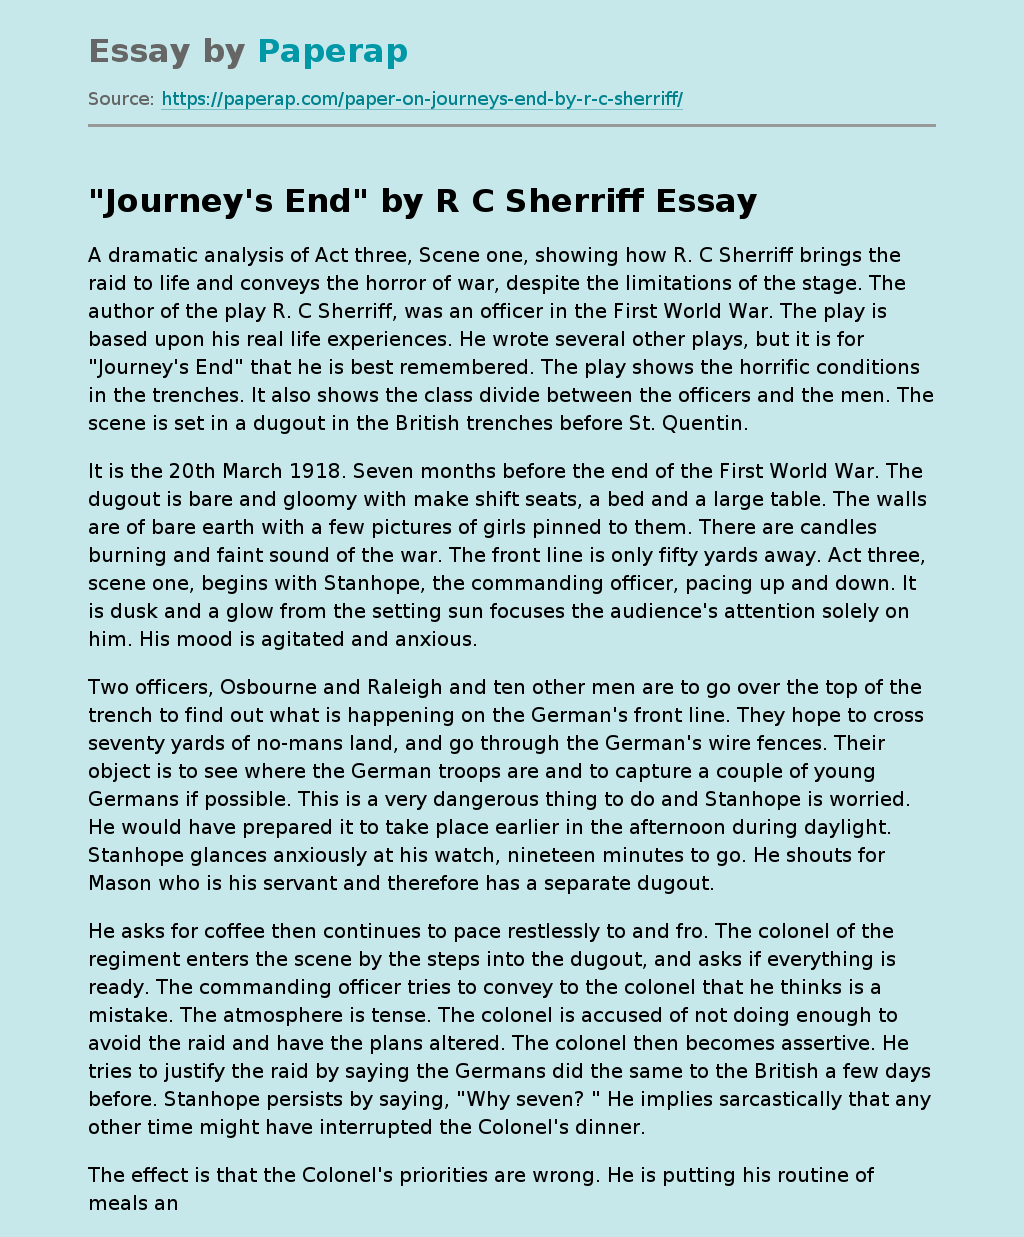 "Journey's End" by R C Sherriff